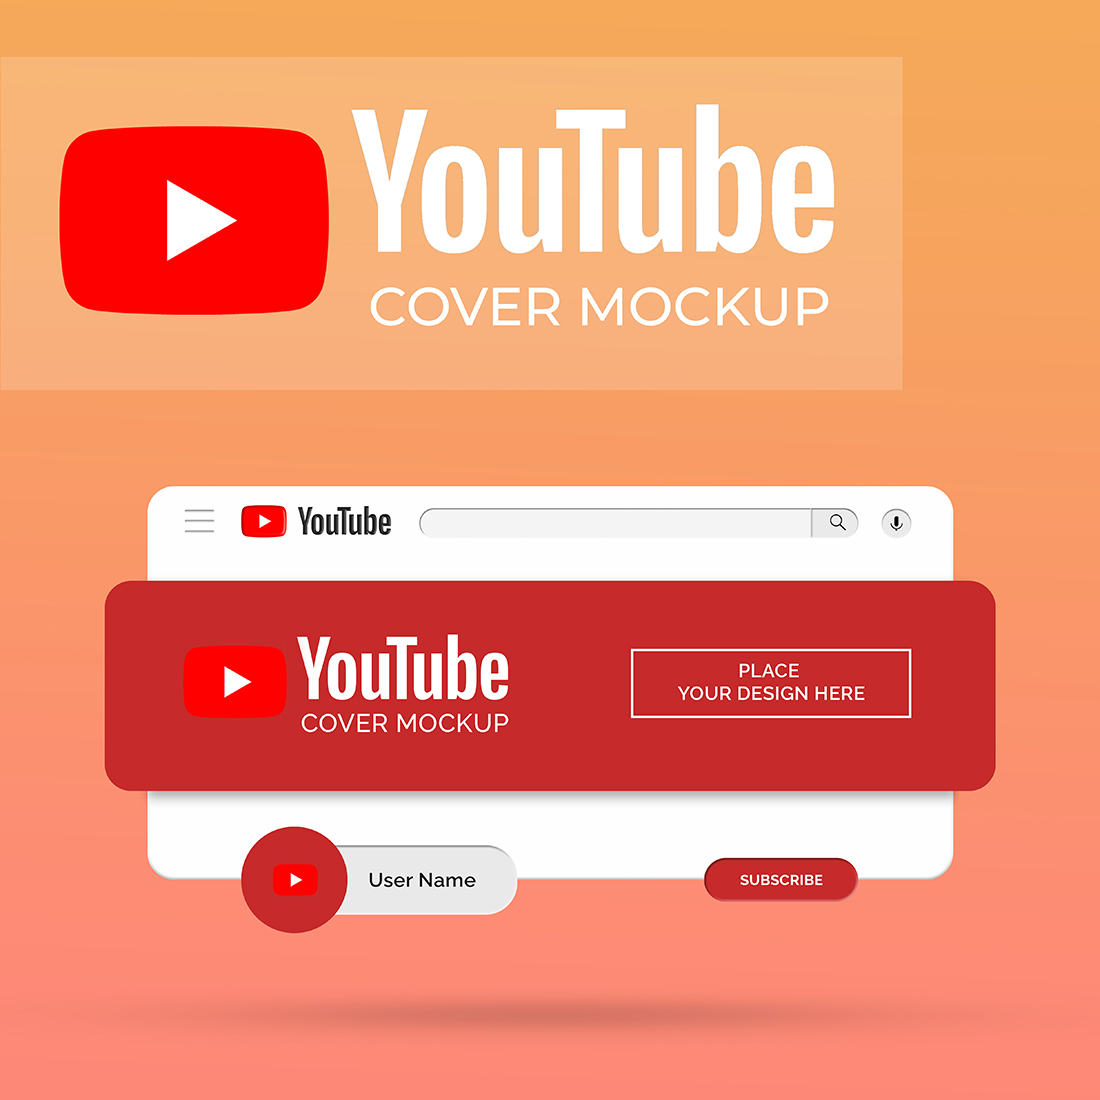 YouTube Covers Mockup Set cover image.